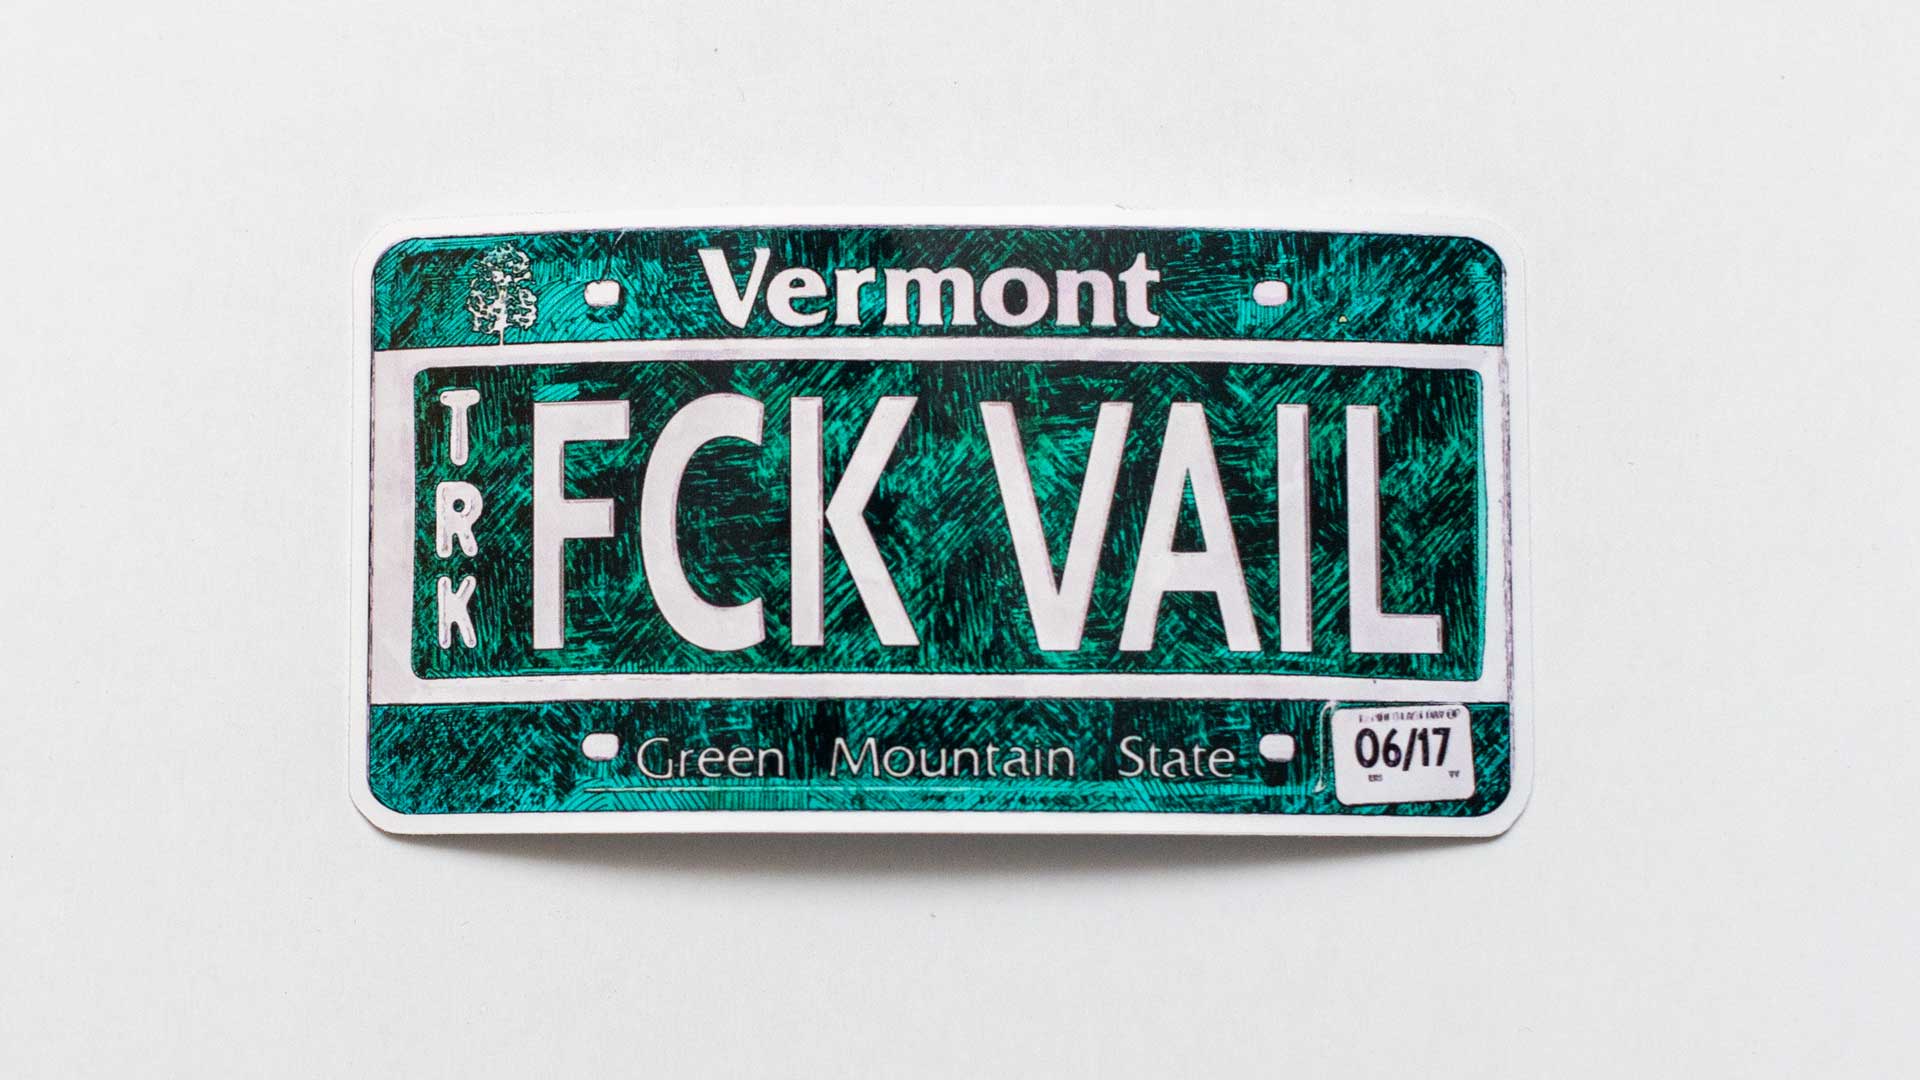 Vinyl Sticker of Vermont License Plate with letters FCK VAIL